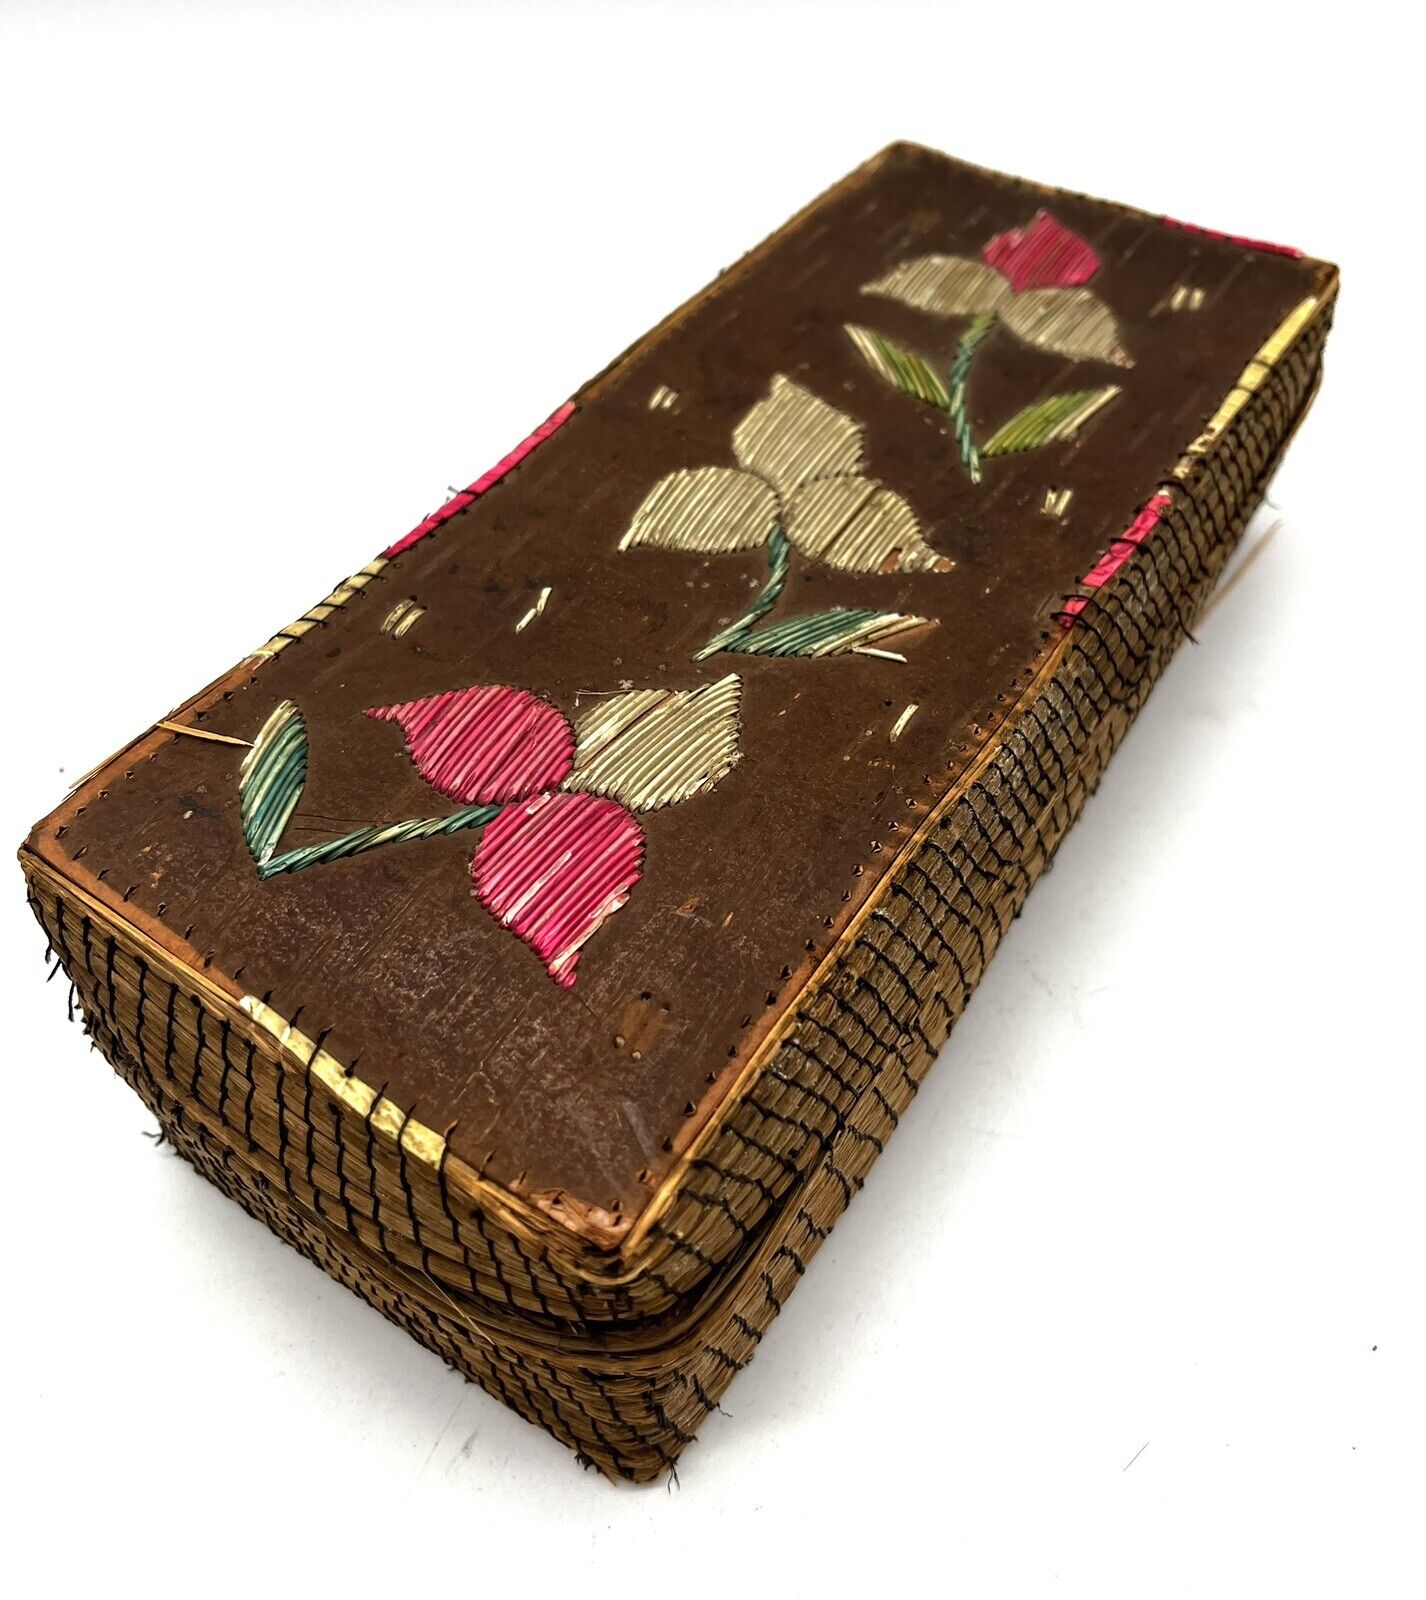 Native American Porcupine Quill Birch Bark and Grass Oblong Box Red Flowers, 4x9